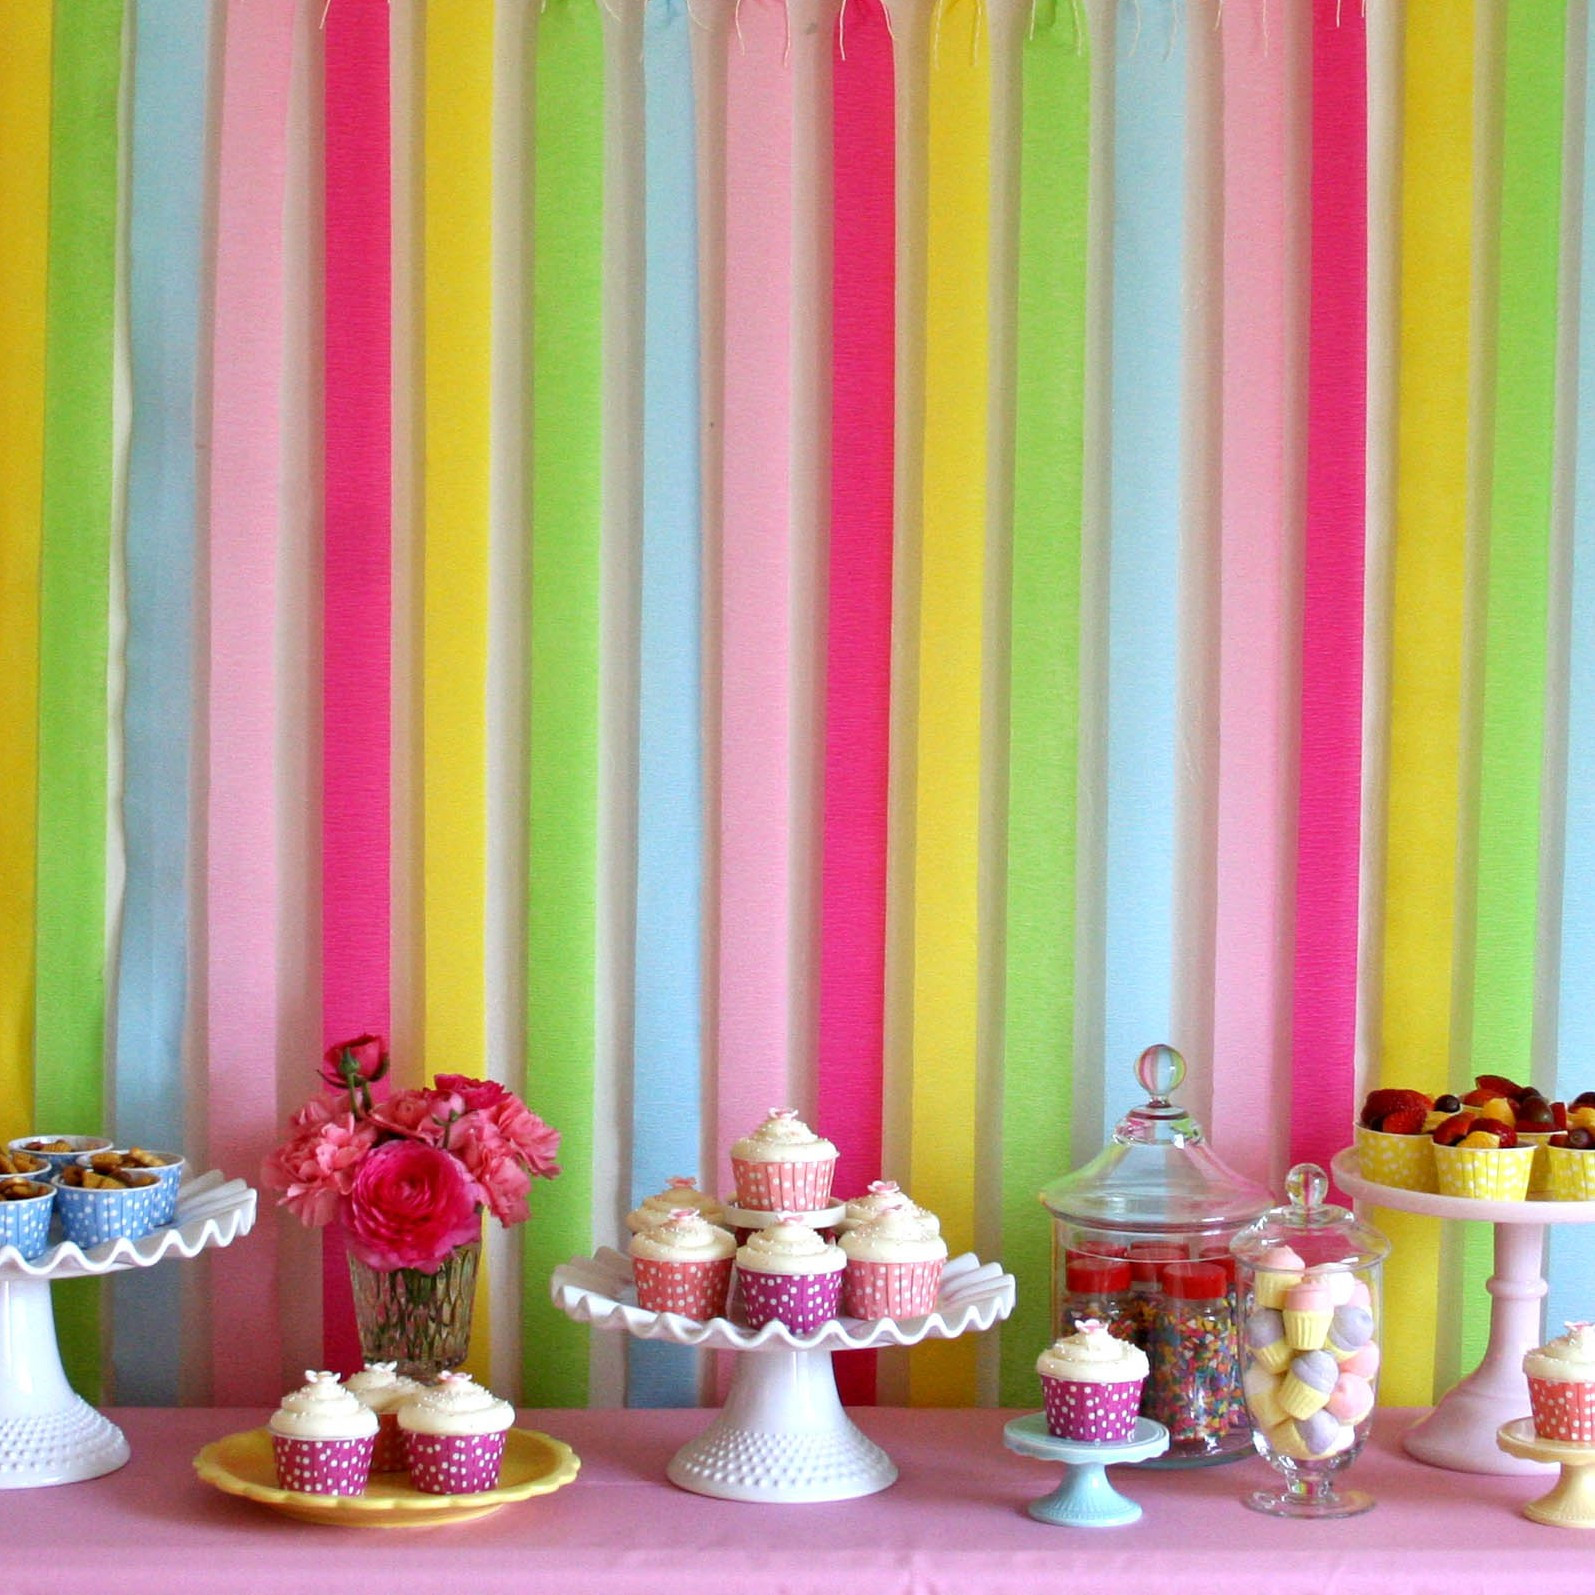 Birthday Party Table Decorations
 Grace s Cake Decorating Party Glorious Treats